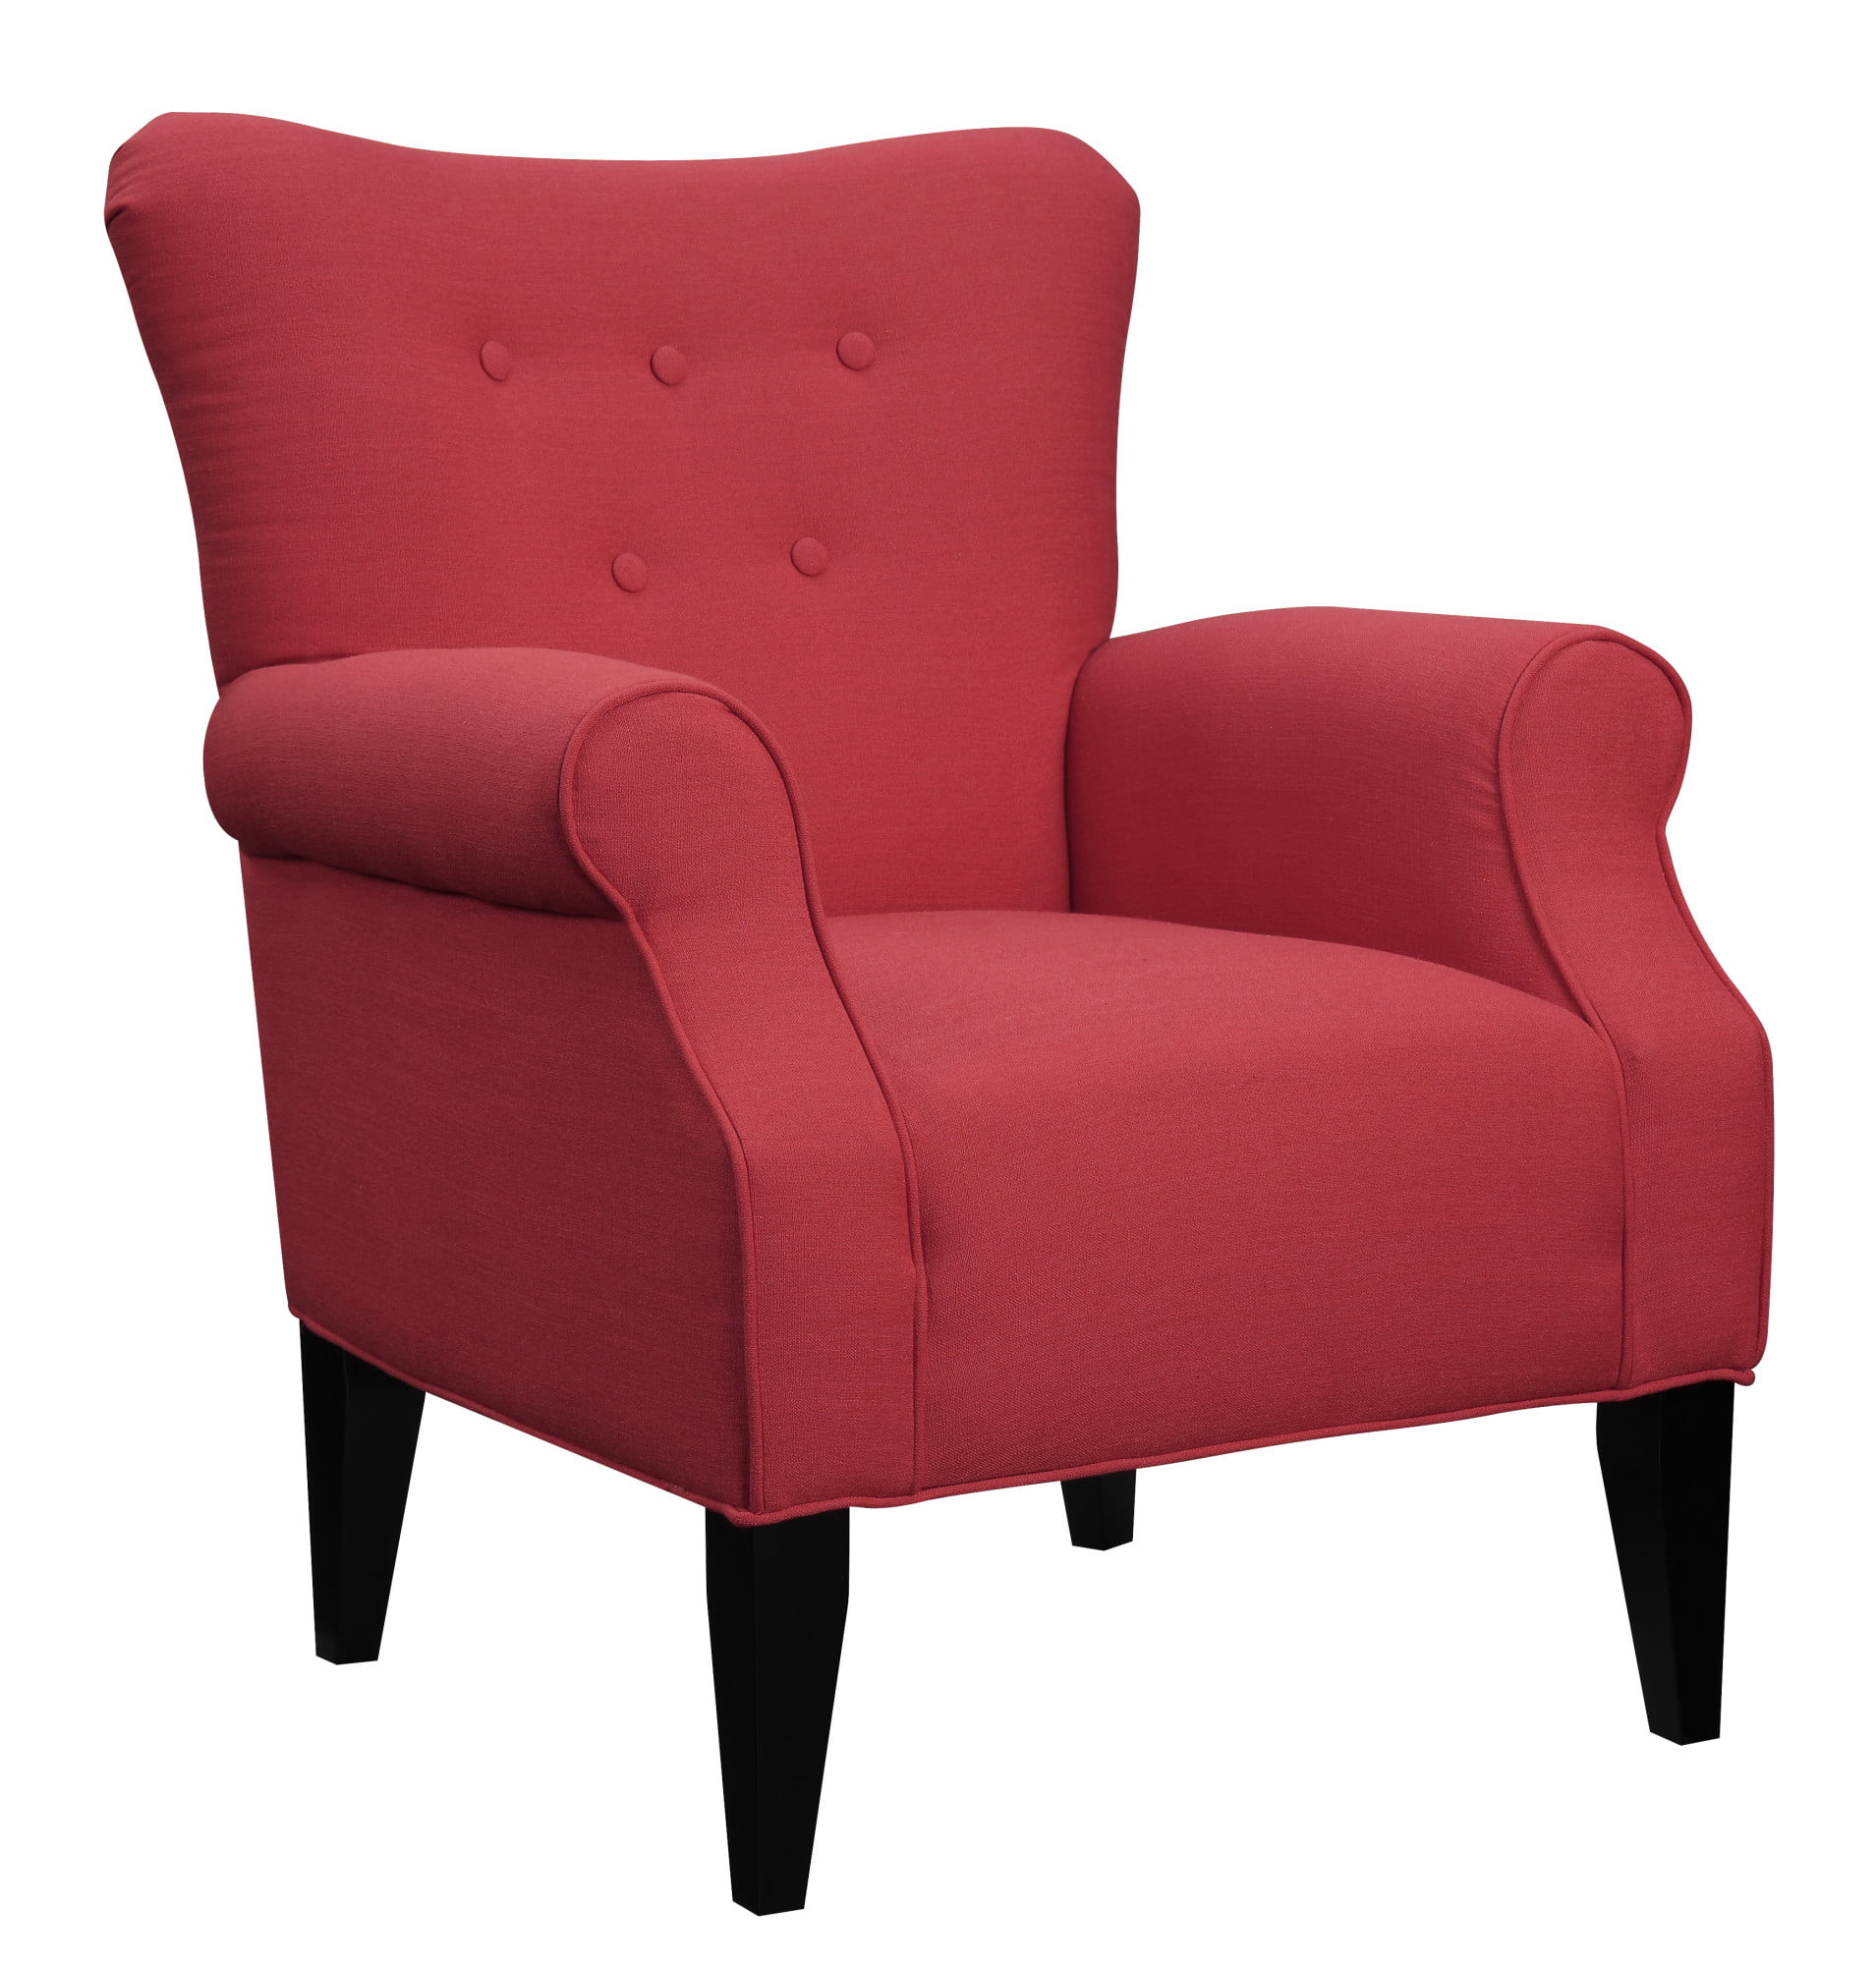 Emerald Home Lydia Lipstick Red Accent Chair with Button Tufting And